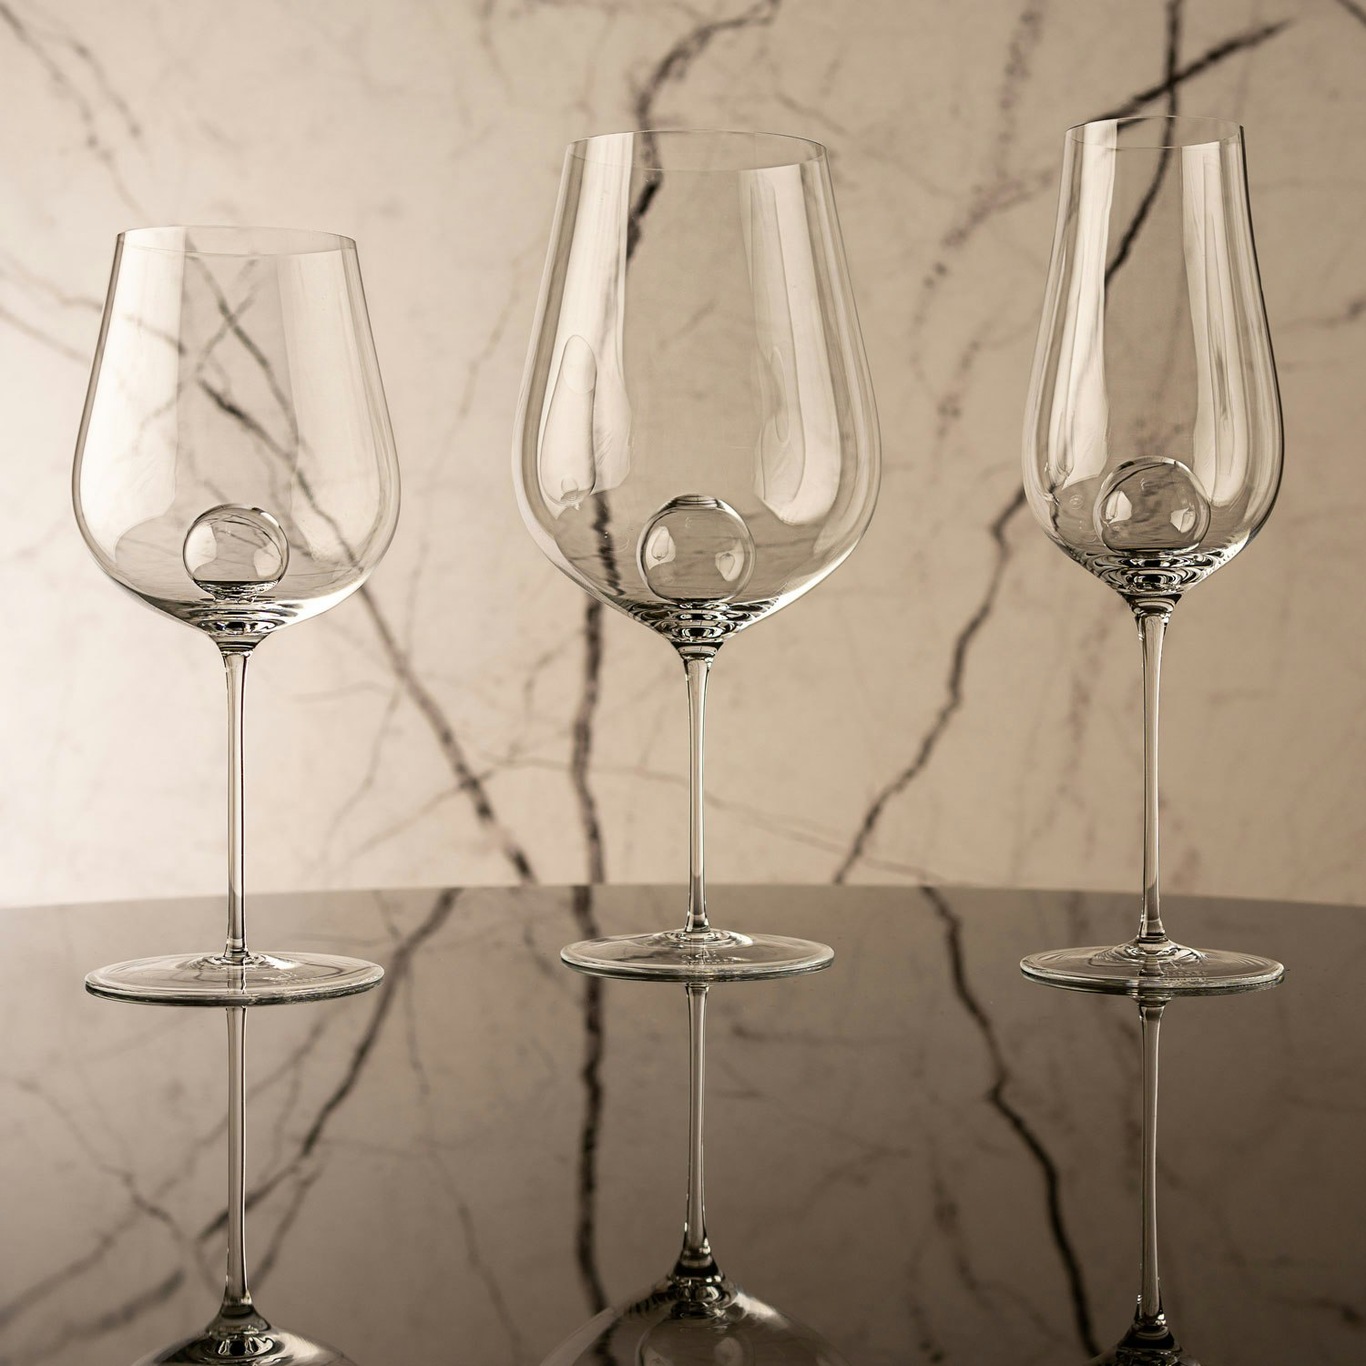 https://royaldesign.com/image/2/zwiesel-air-sense-bordeaux-red-wine-glass-84-cl-2-pack-4?w=800&quality=80